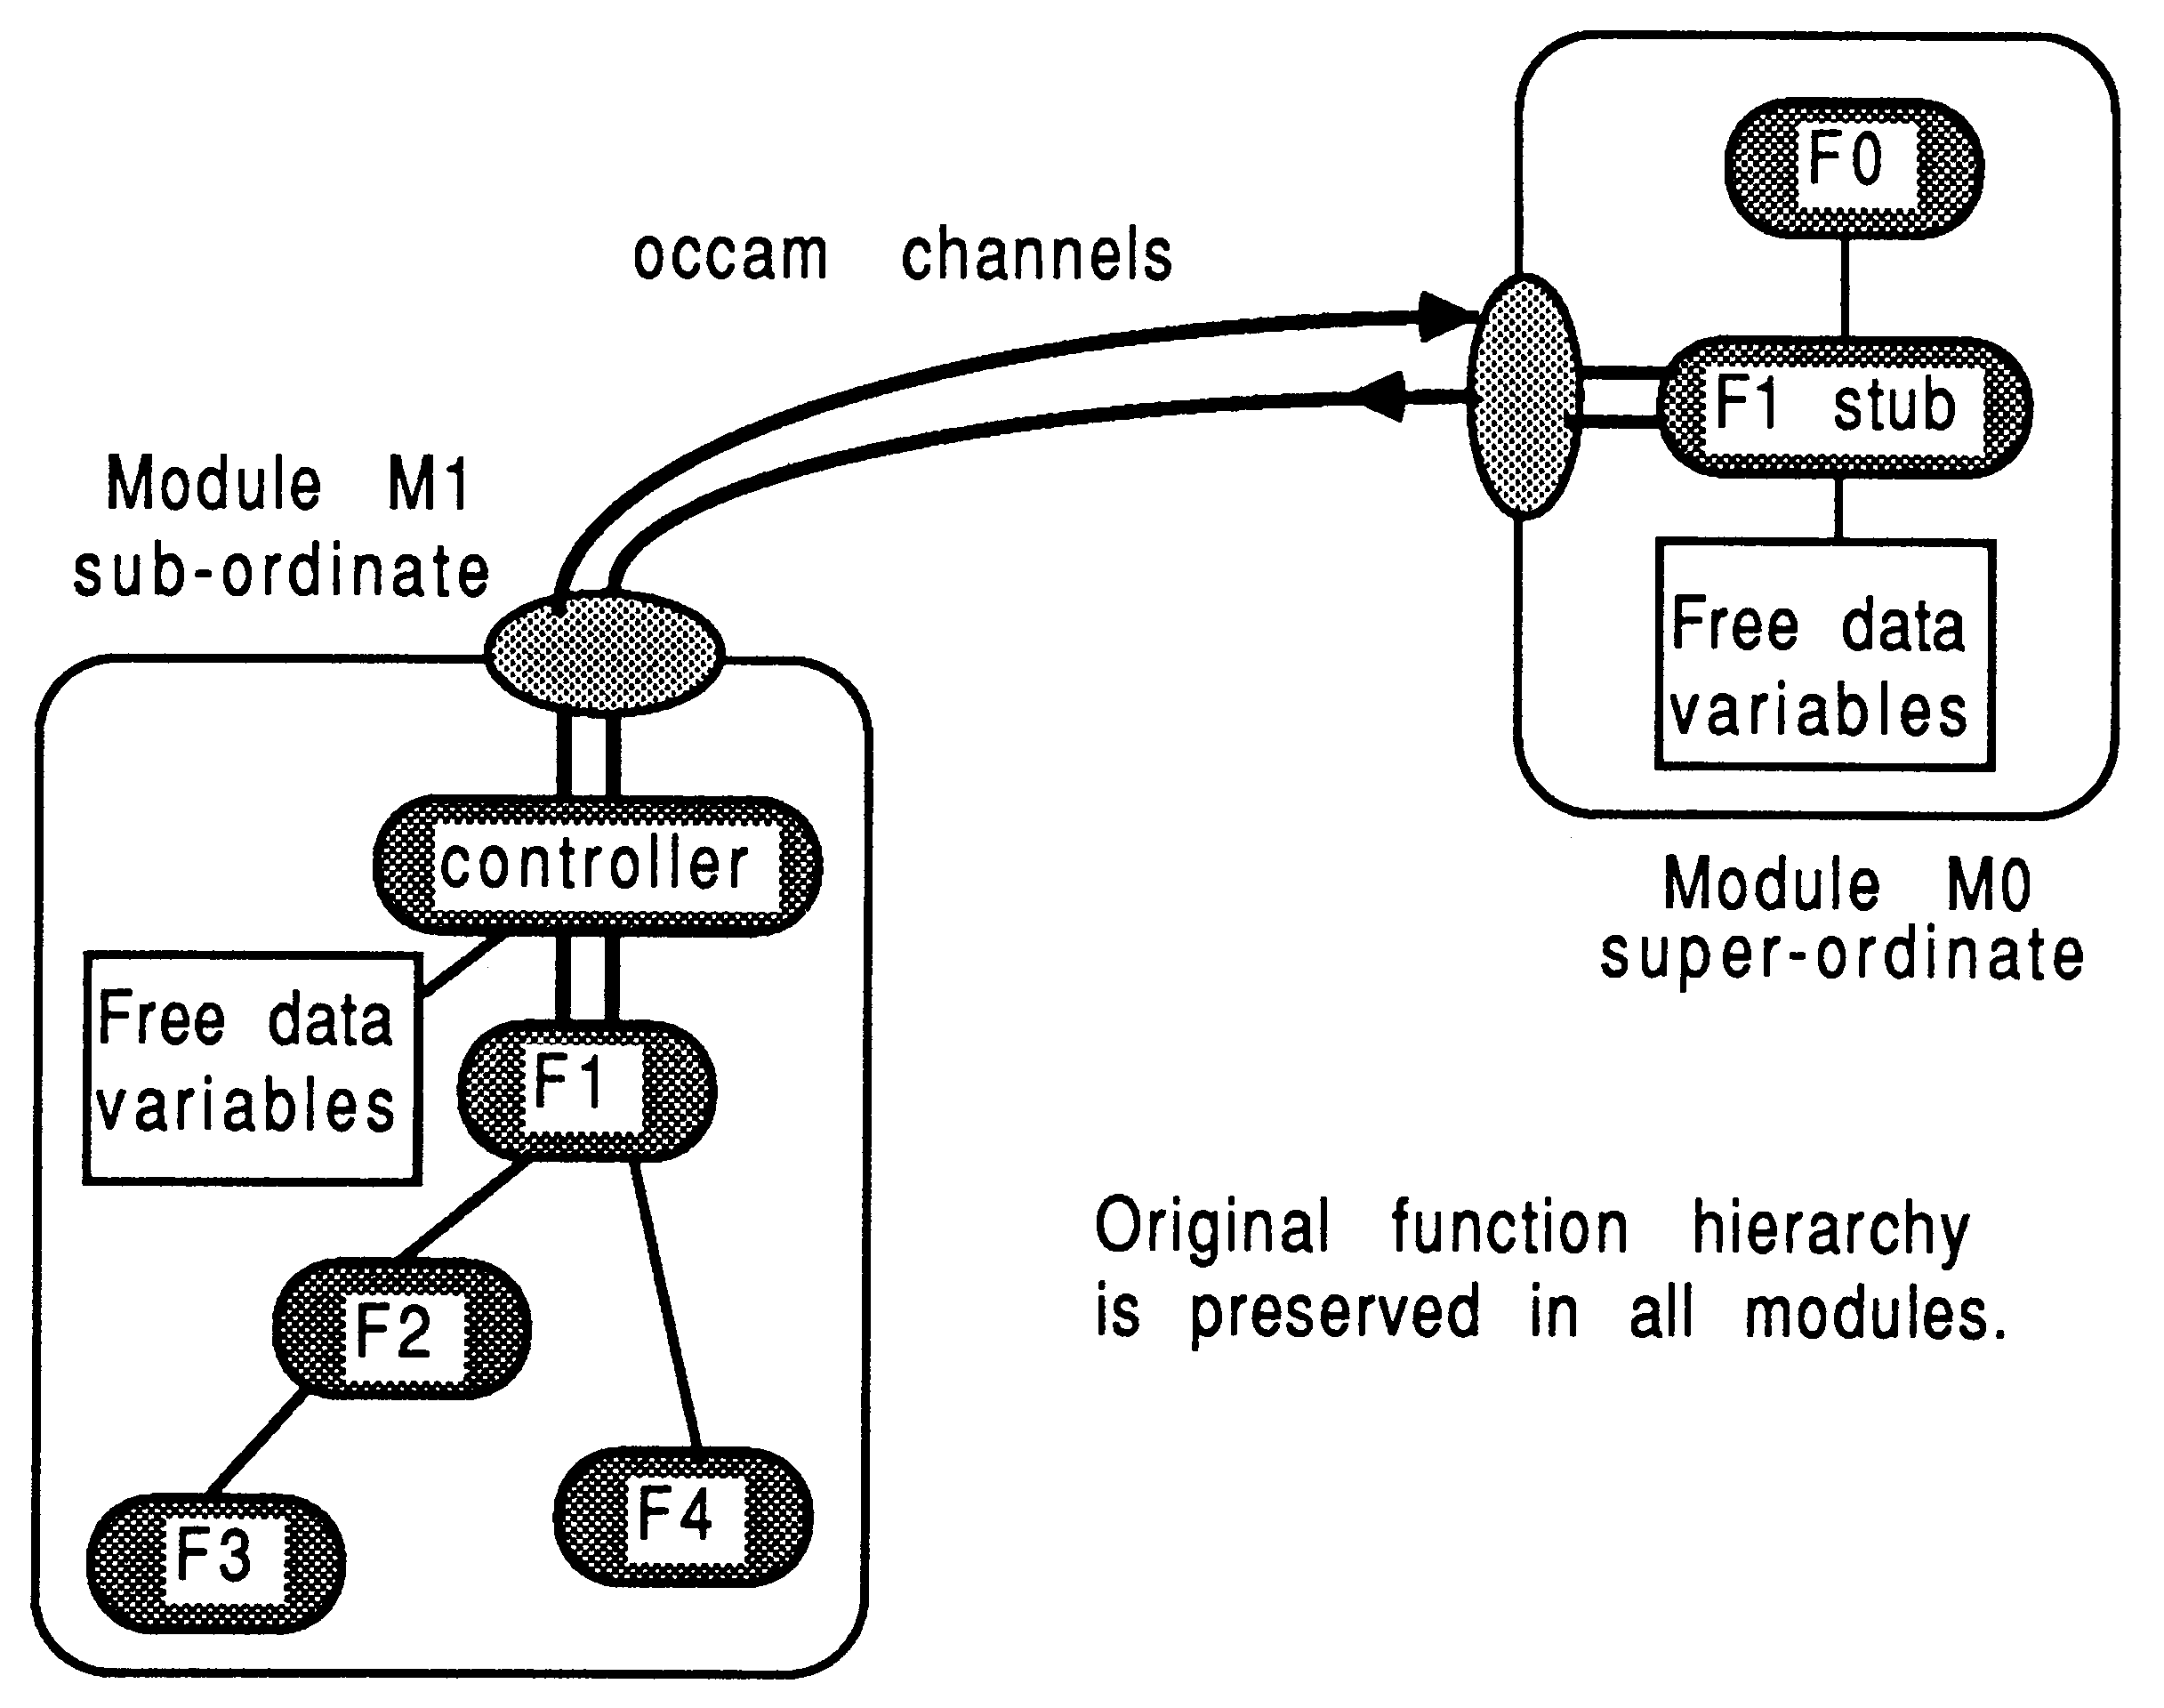 The twin module system